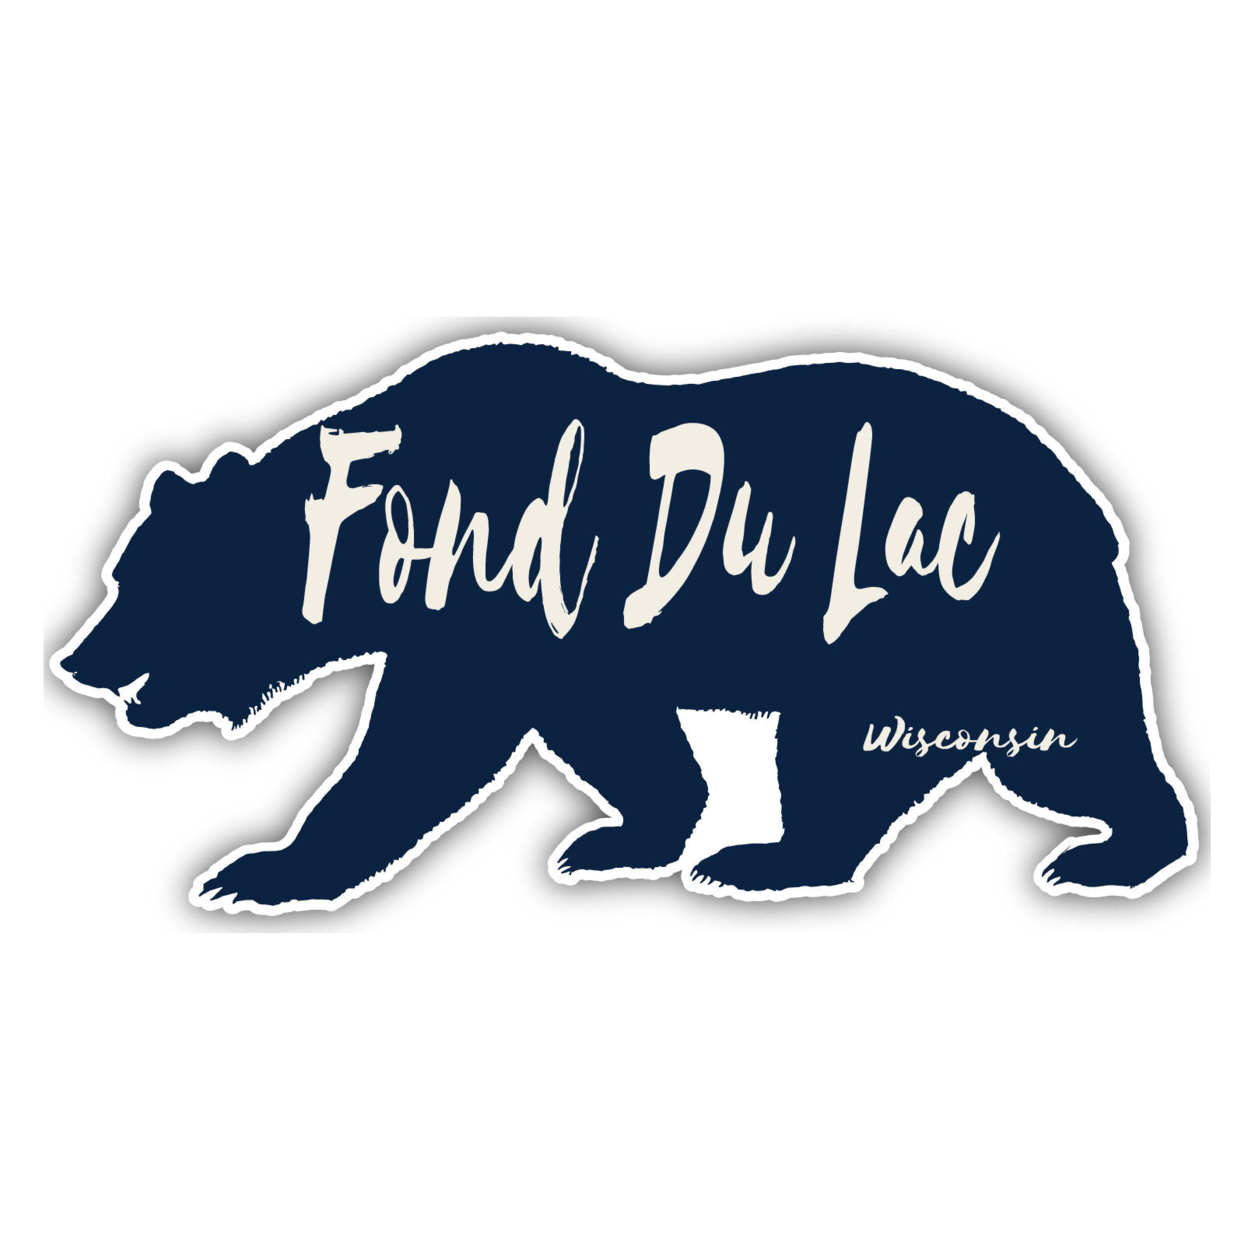 Fond Du Lac Wisconsin Souvenir Decorative Stickers (Choose Theme And Size) - 4-Pack, 12-Inch, Bear